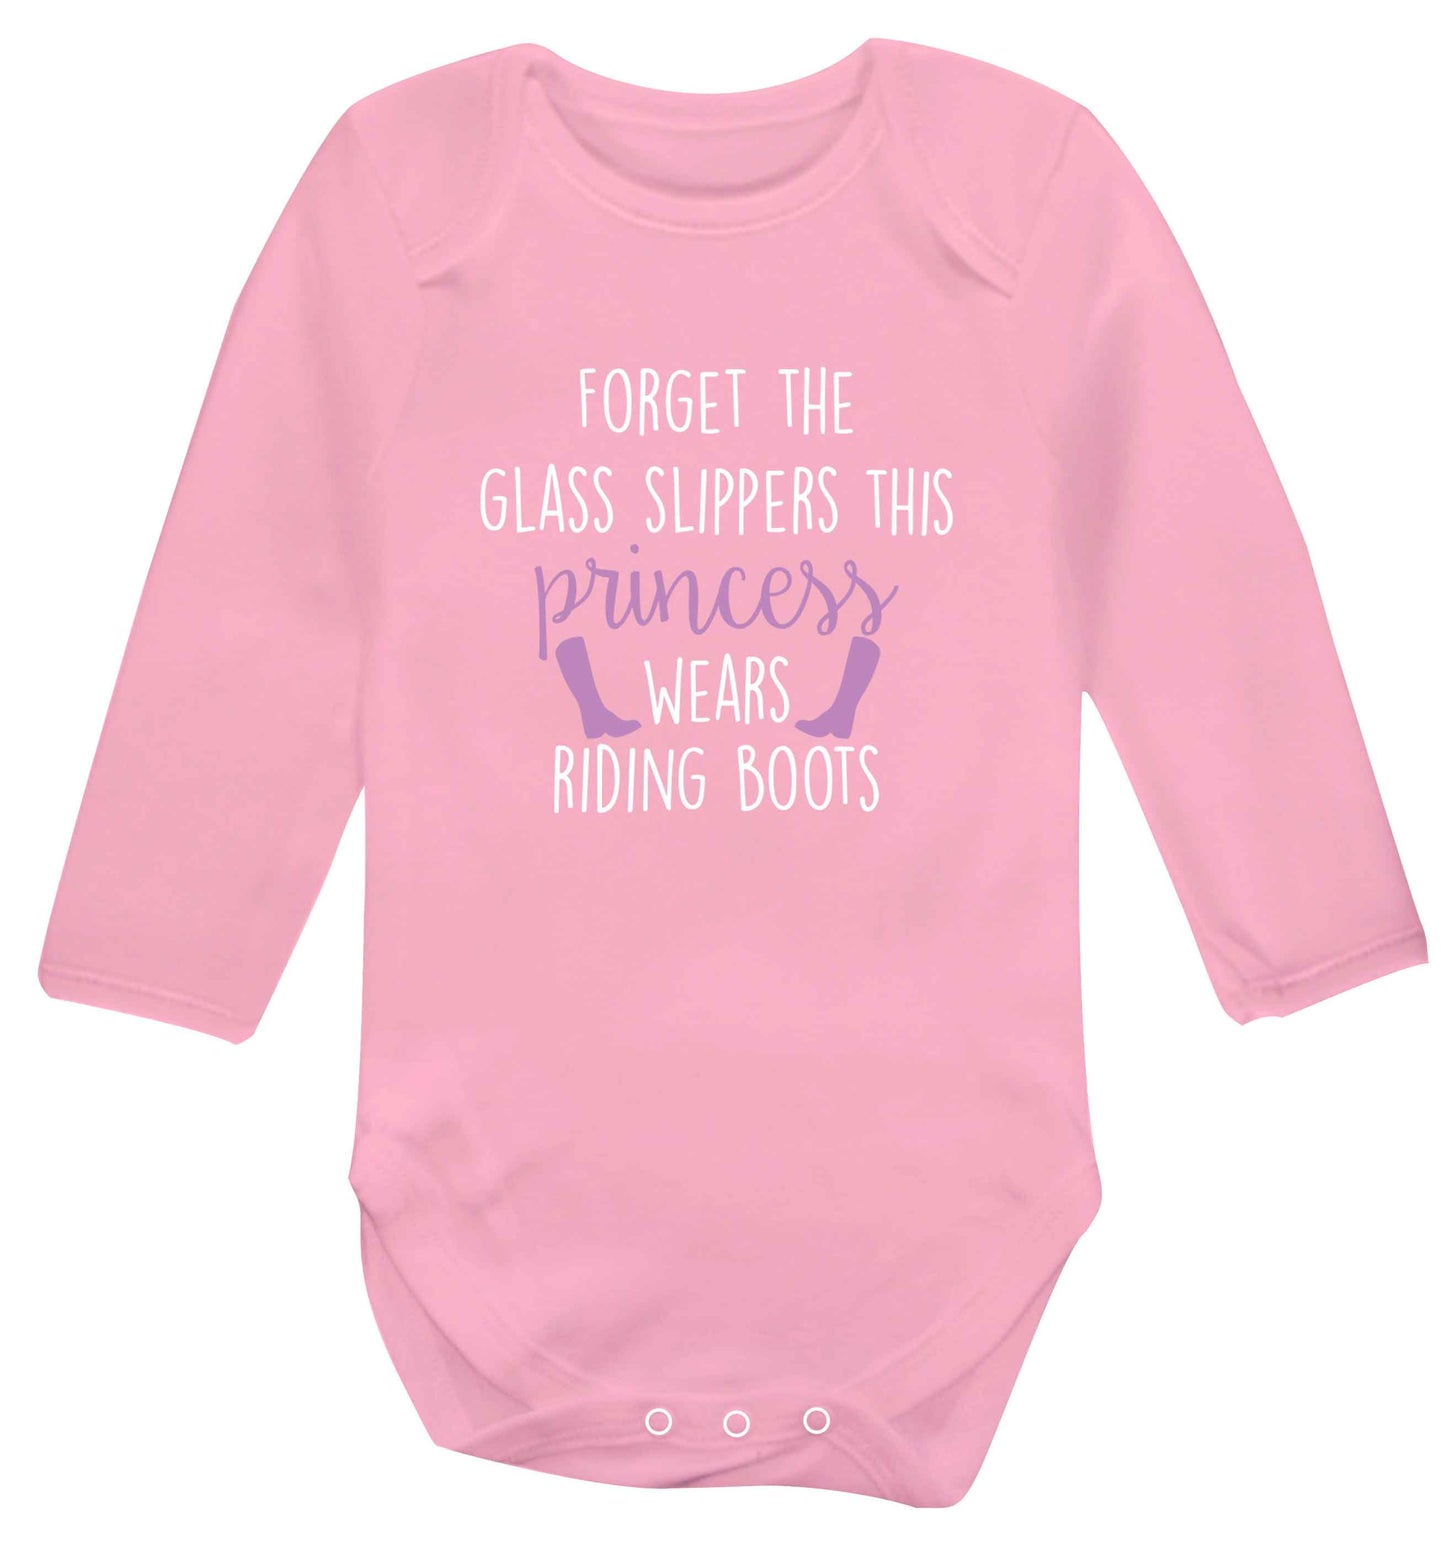 Forget the glass slippers this princess wears riding boots baby vest long sleeved pale pink 6-12 months